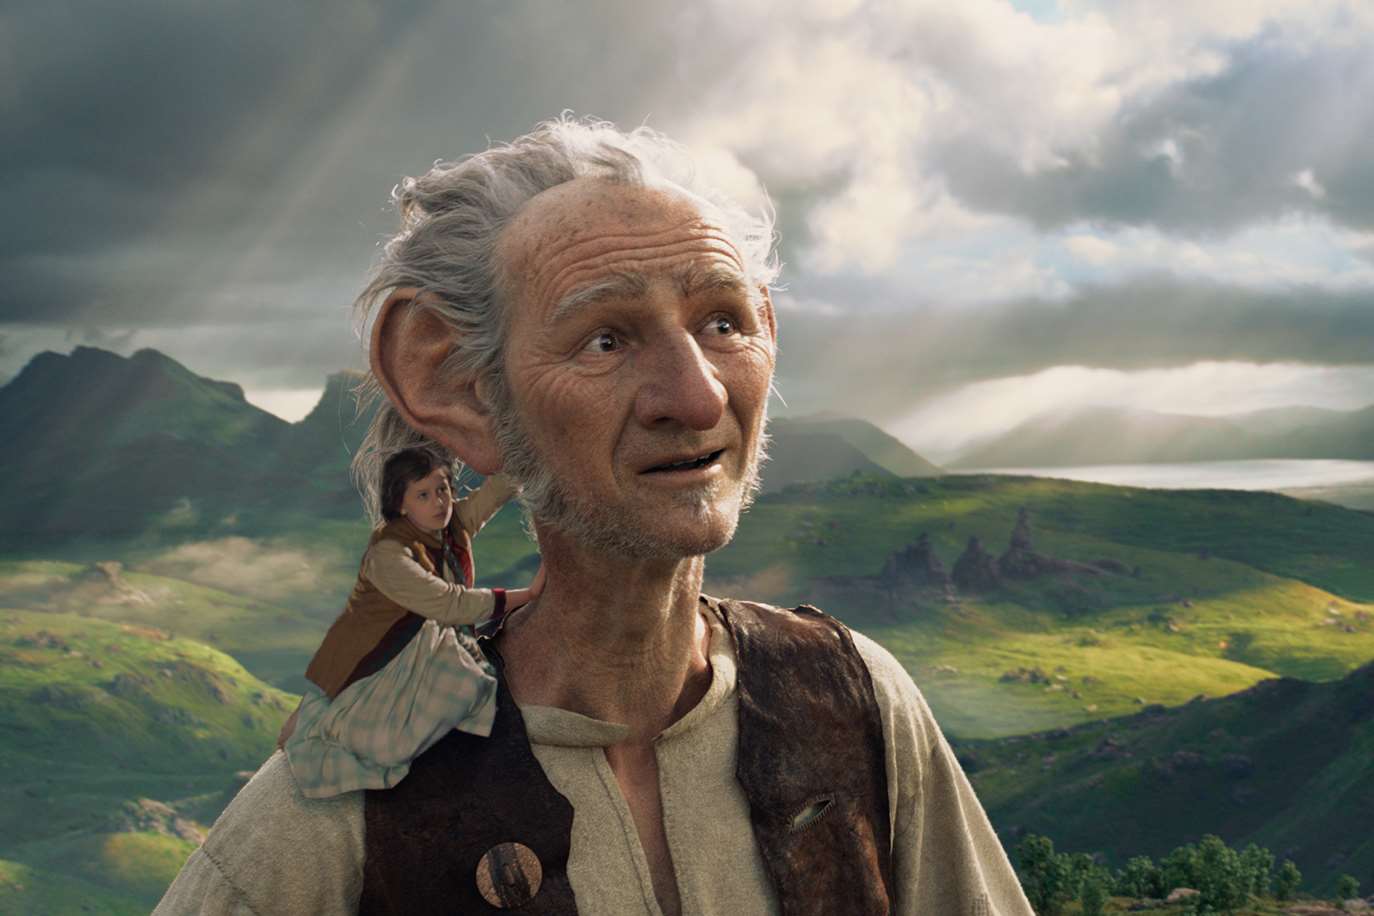 The BFG will kick off the open air cinema season at Betteshanger Country Park